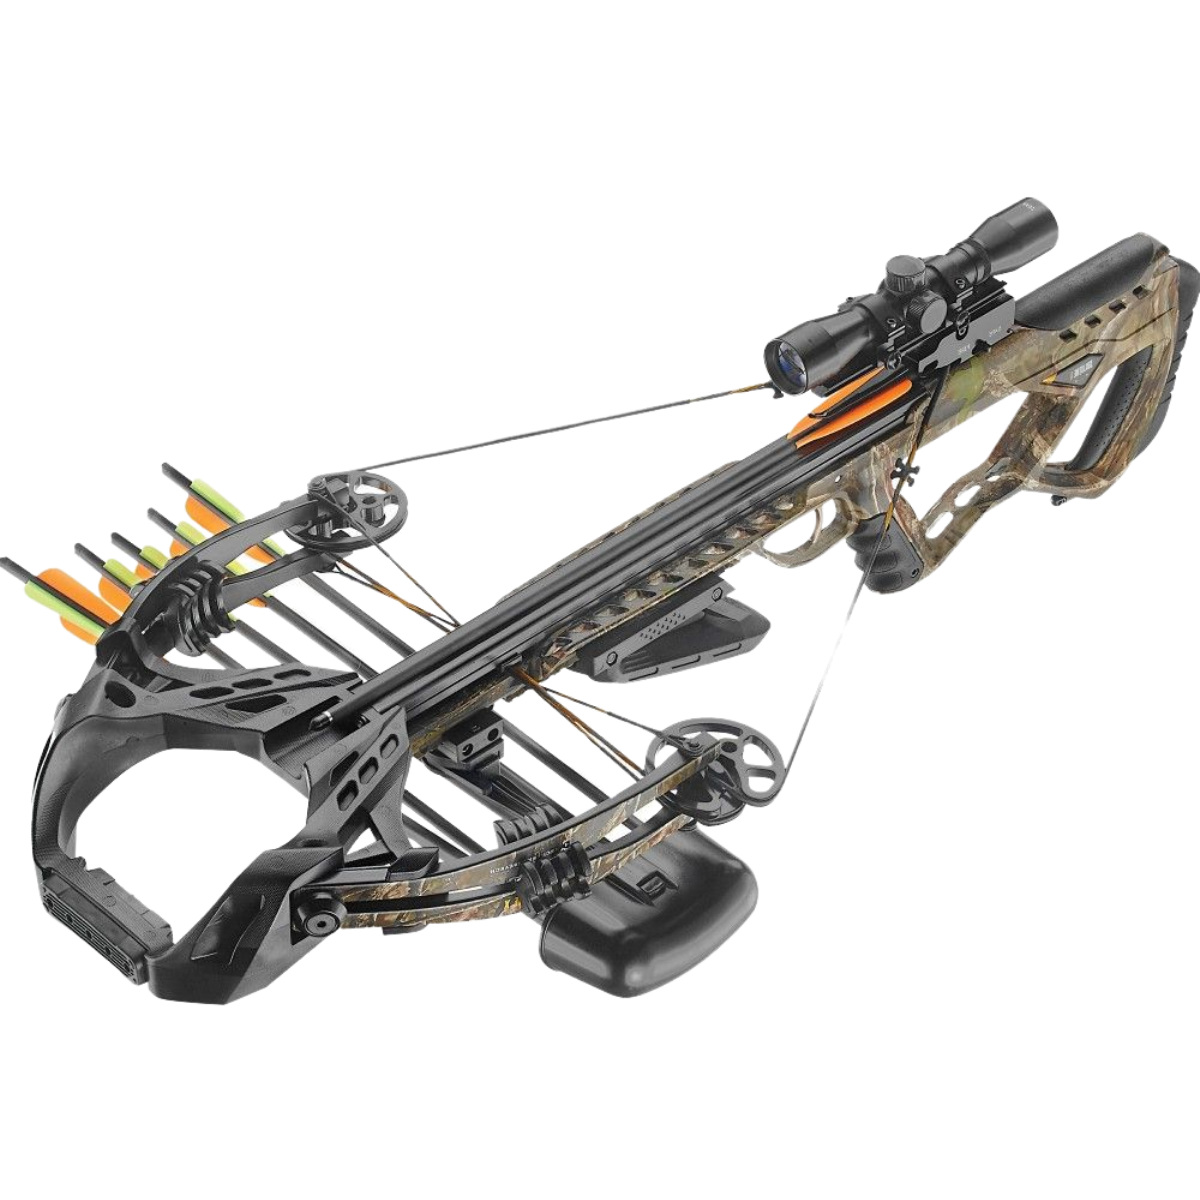 EK Archery Guillotine-X+ Compound Crossbow Package 400fps - Fast UK Shipping | Tactical Archery UK